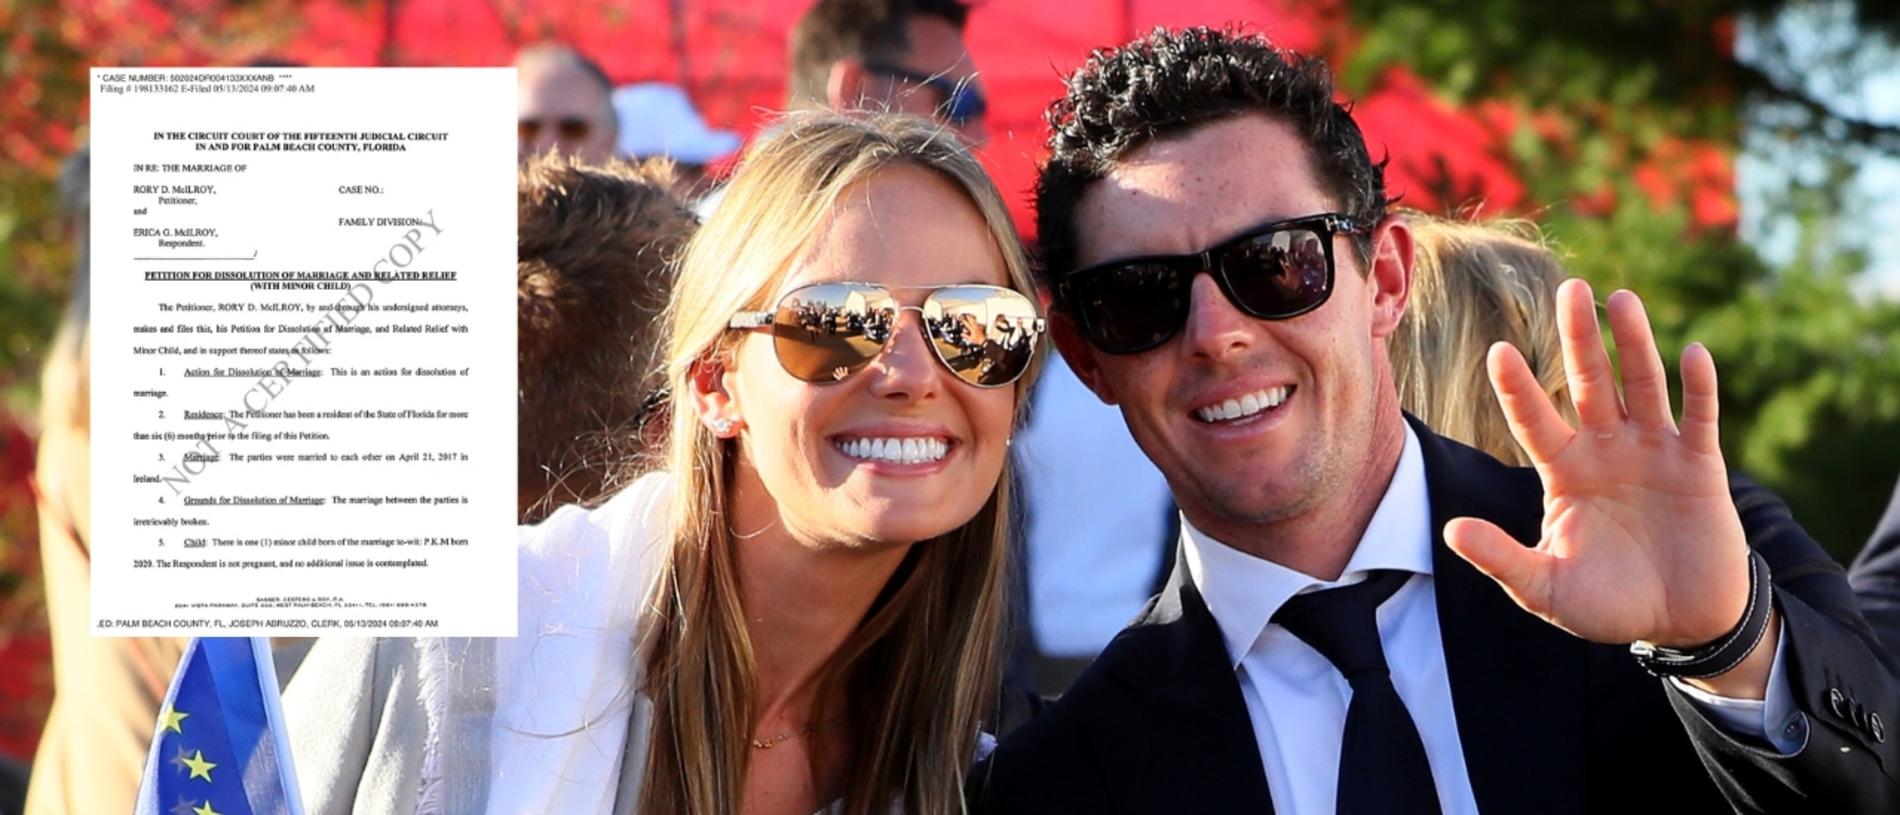 Erica Stoll and Rory McIlroy had a pre-nup. Photo: Getty and PBCC/MEGA.